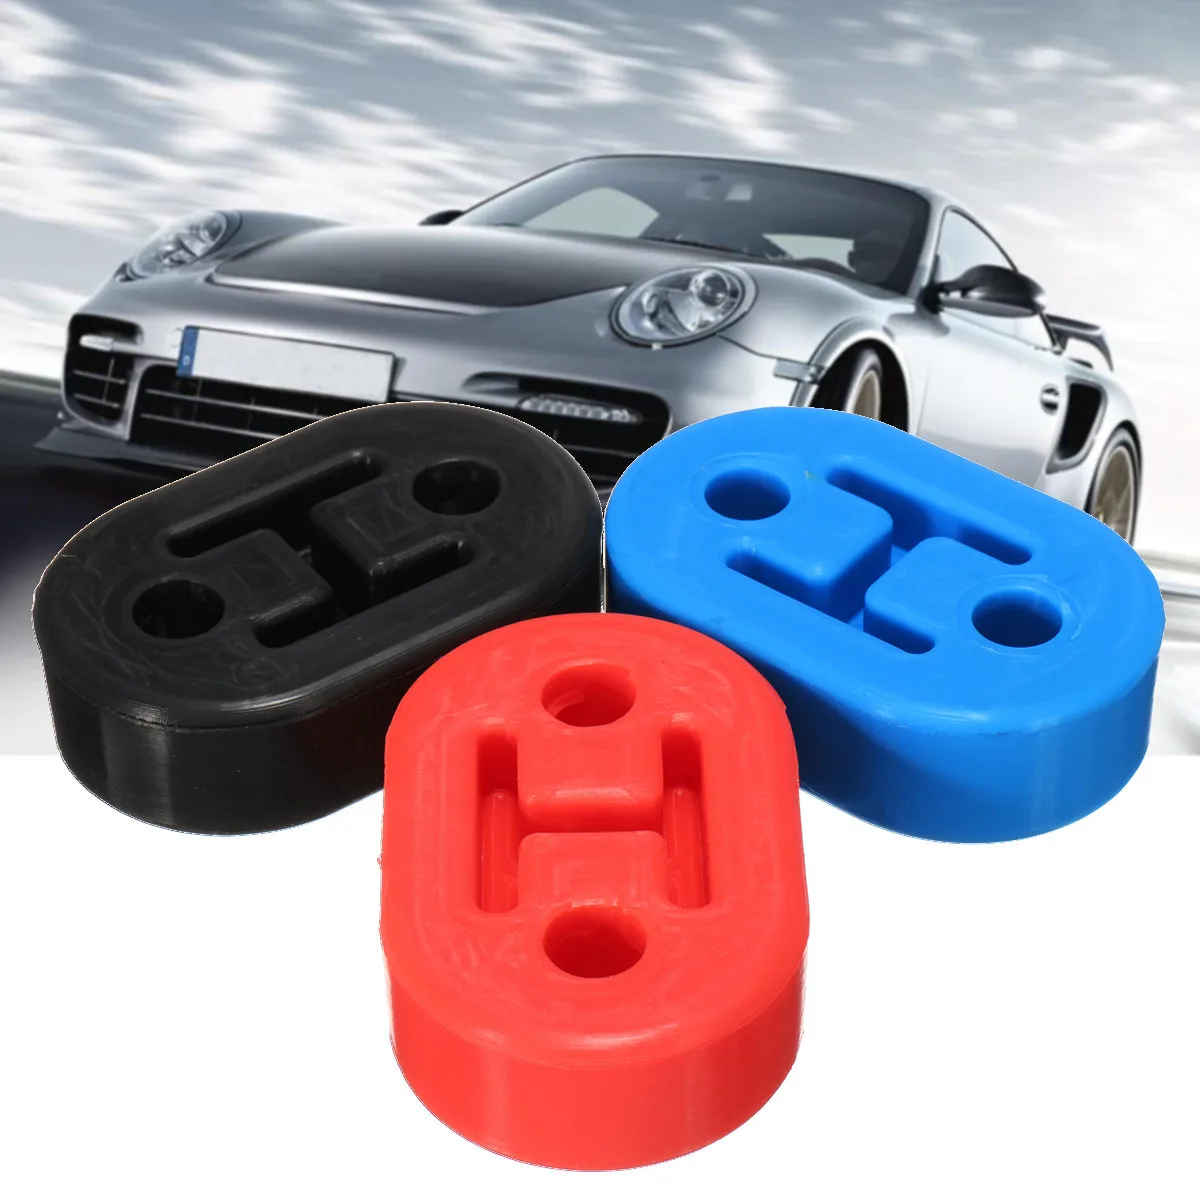 

2 Holes 11mm Diameter Universal Car Rubber Exhaust Rear Tail Pipe Mount Brackets Hanger Insulator Support Mount blue black red